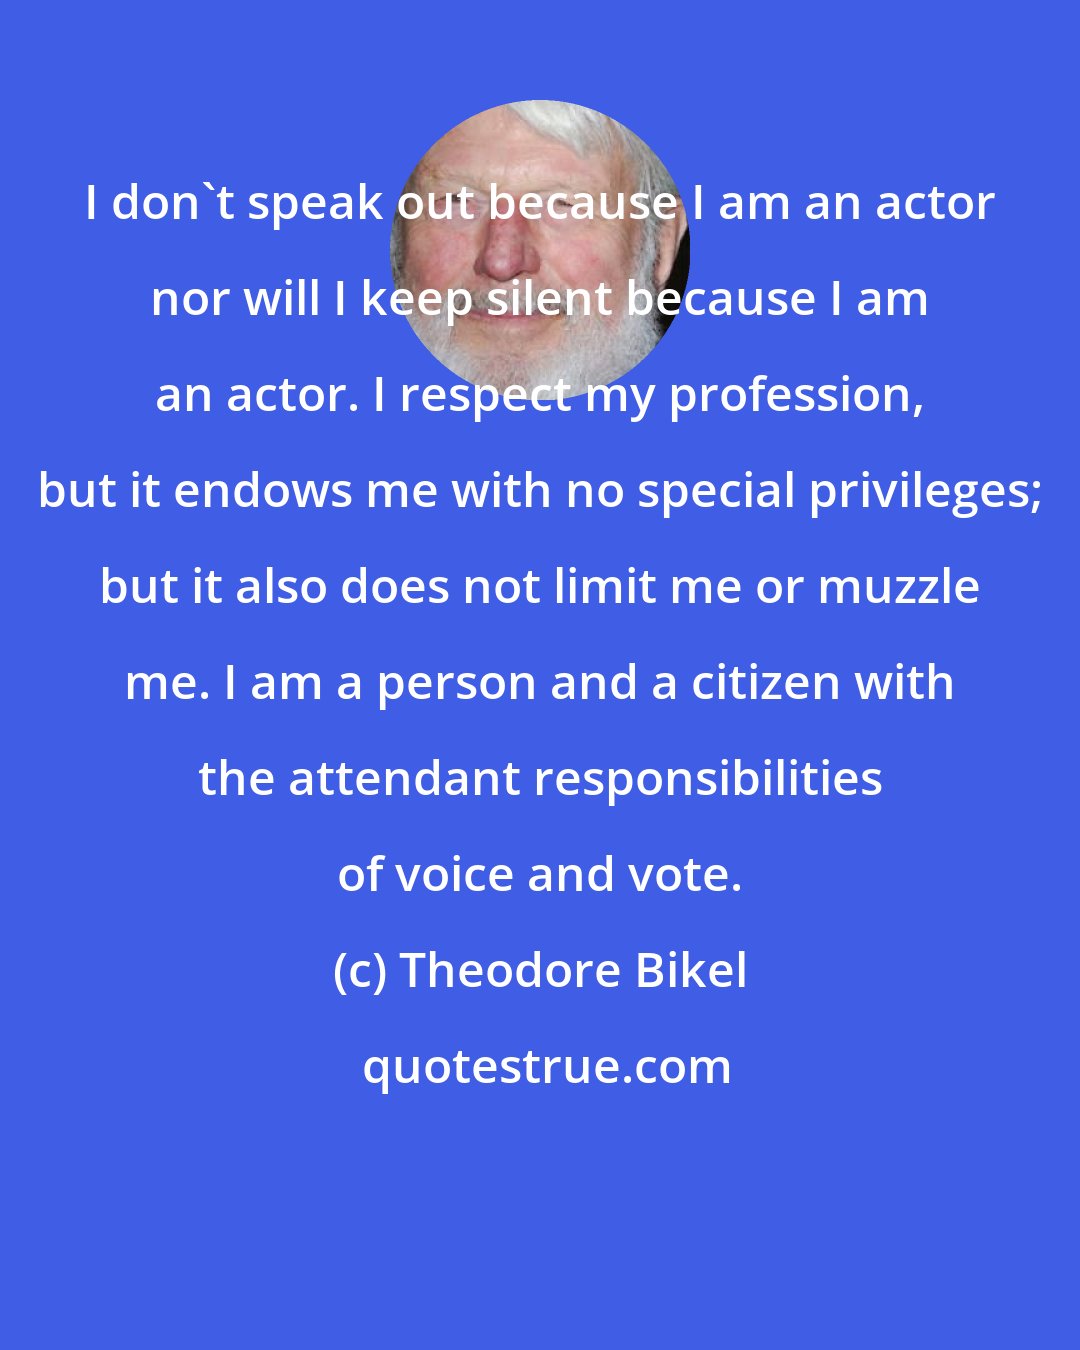 Theodore Bikel: I don't speak out because I am an actor nor will I keep silent because I am an actor. I respect my profession, but it endows me with no special privileges; but it also does not limit me or muzzle me. I am a person and a citizen with the attendant responsibilities of voice and vote.